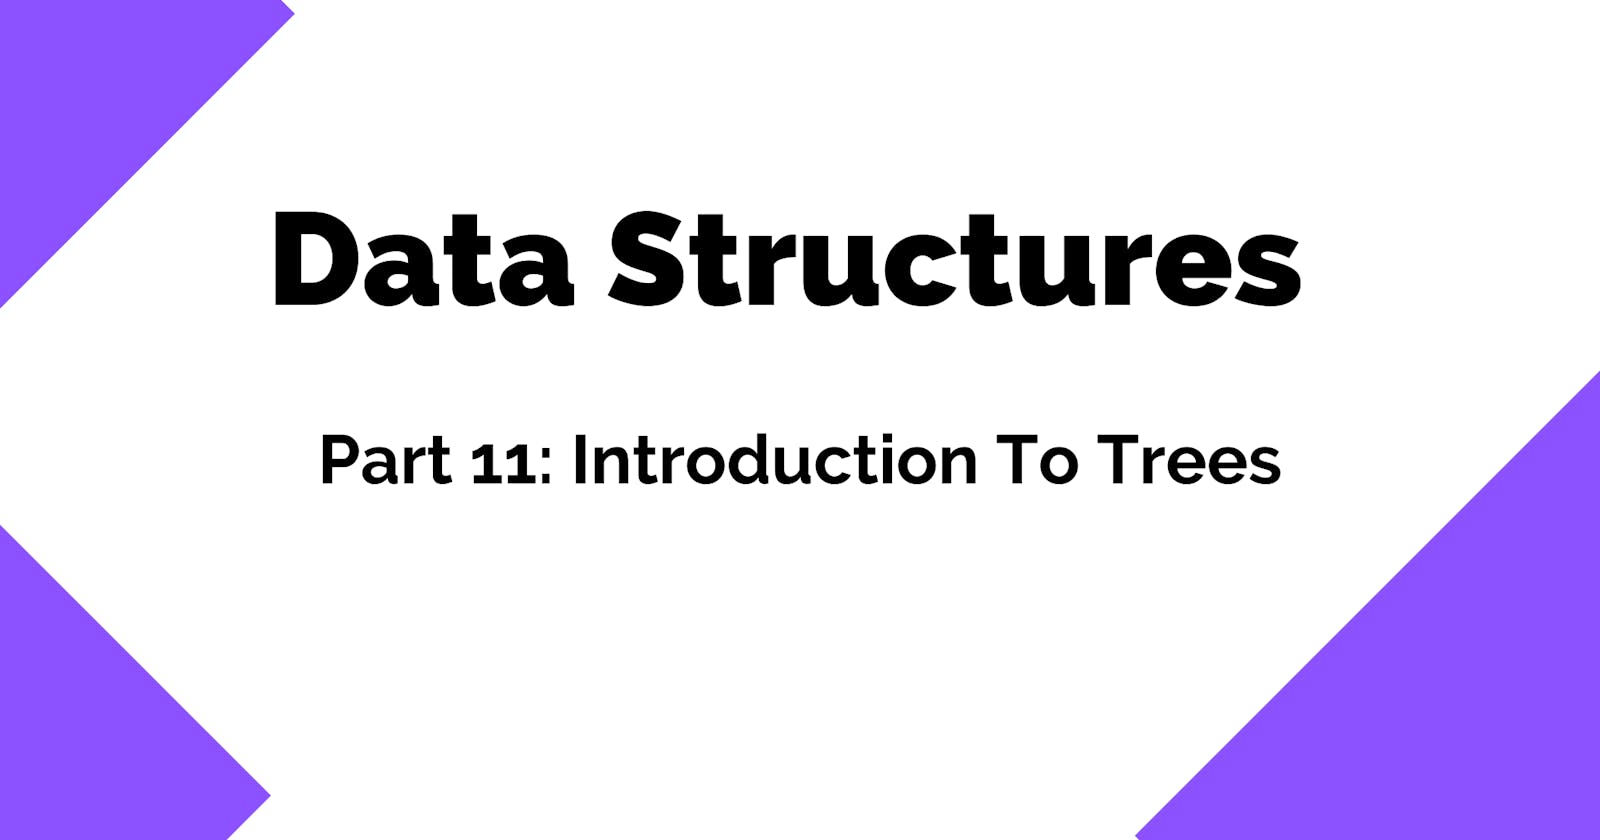 Data Structures 101: Introduction To Trees